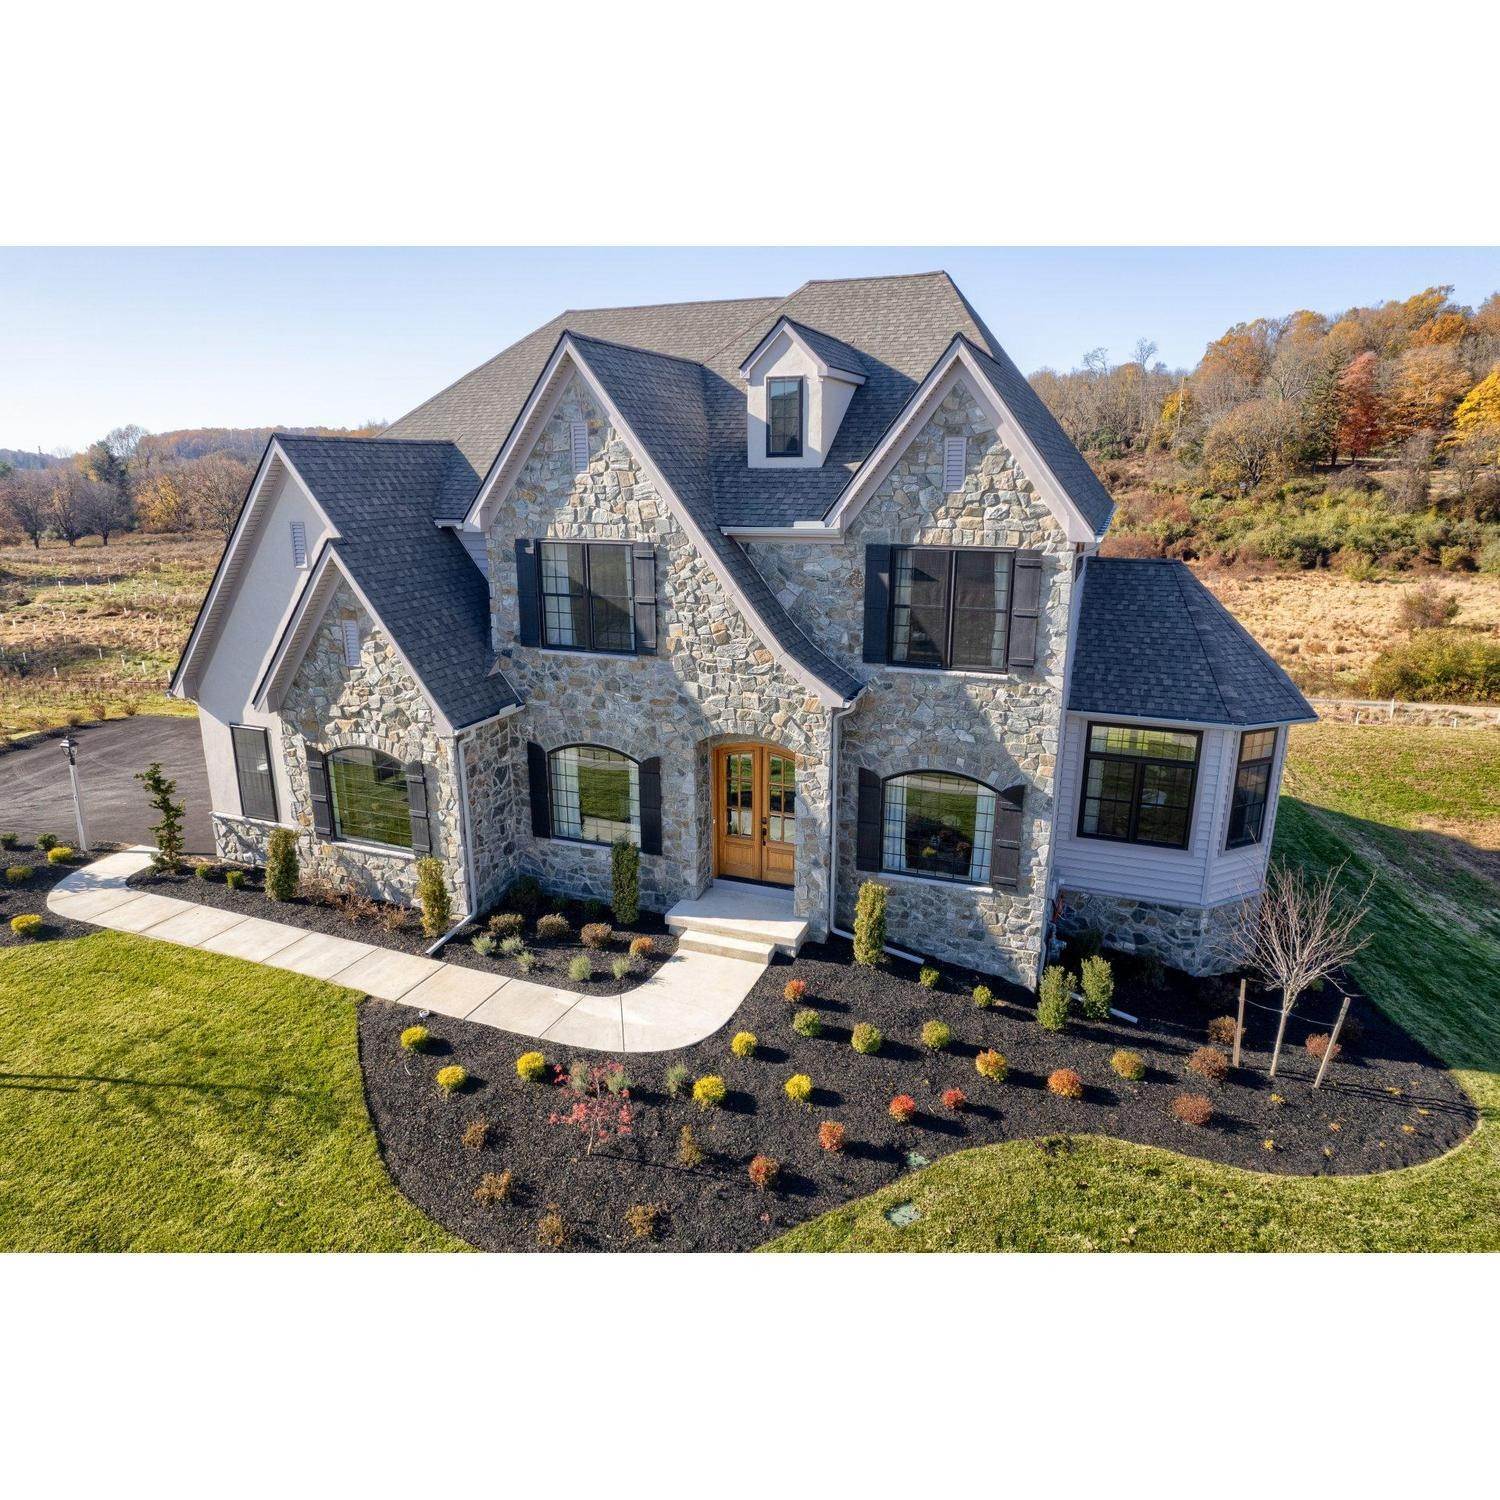 43. Ventry at Edgmont Preserve Gebäude bei 101 Parkview Way, Newtown Square, PA 19073